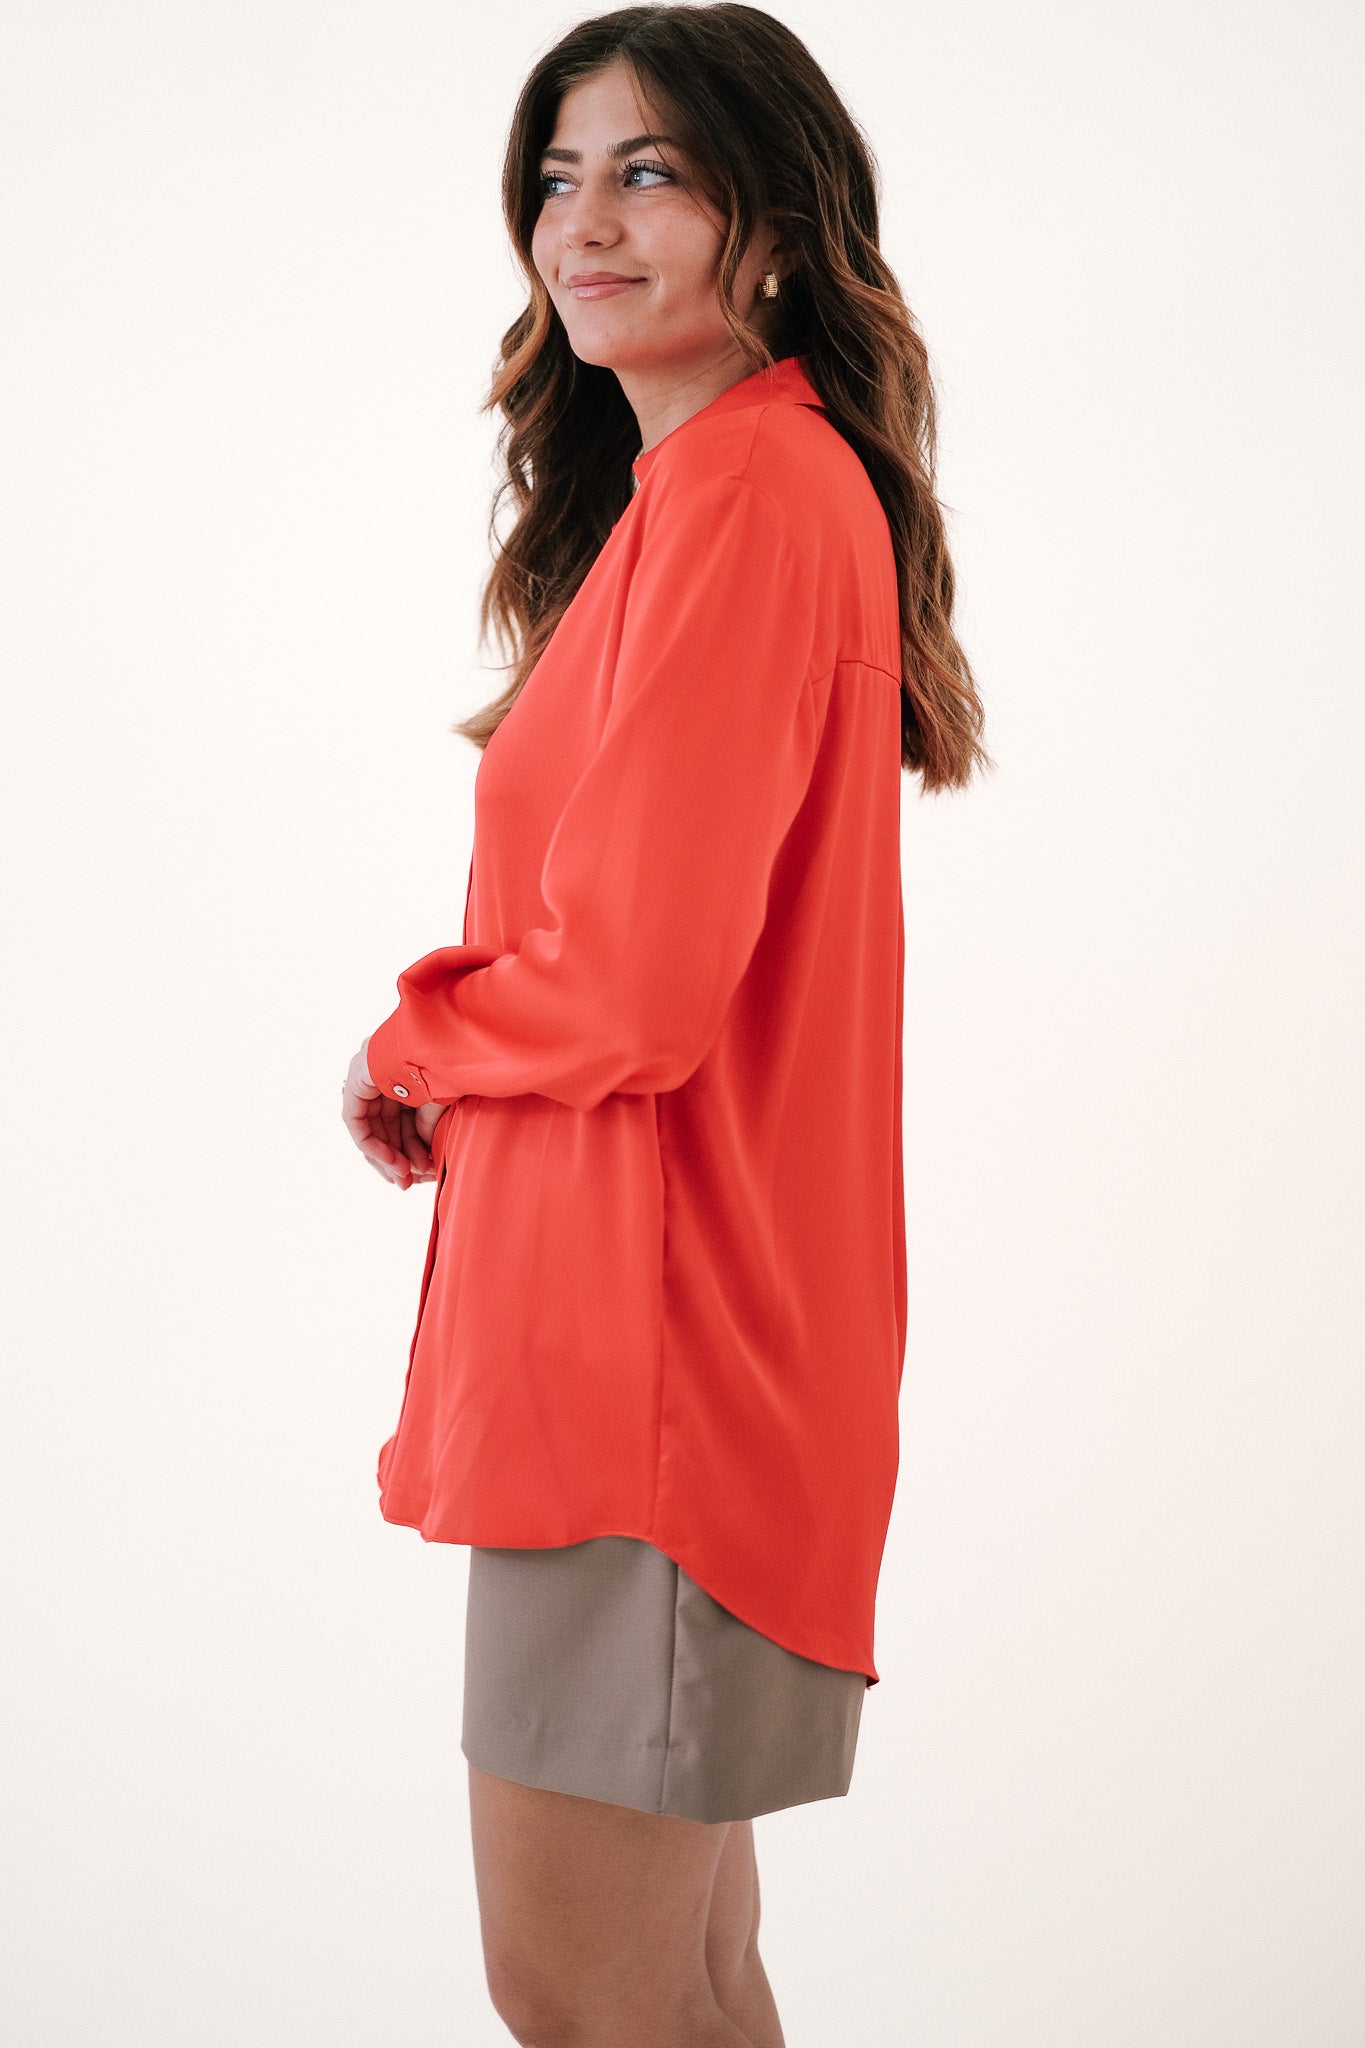 Lucy Paris Elena Red Satin Buttoned Top